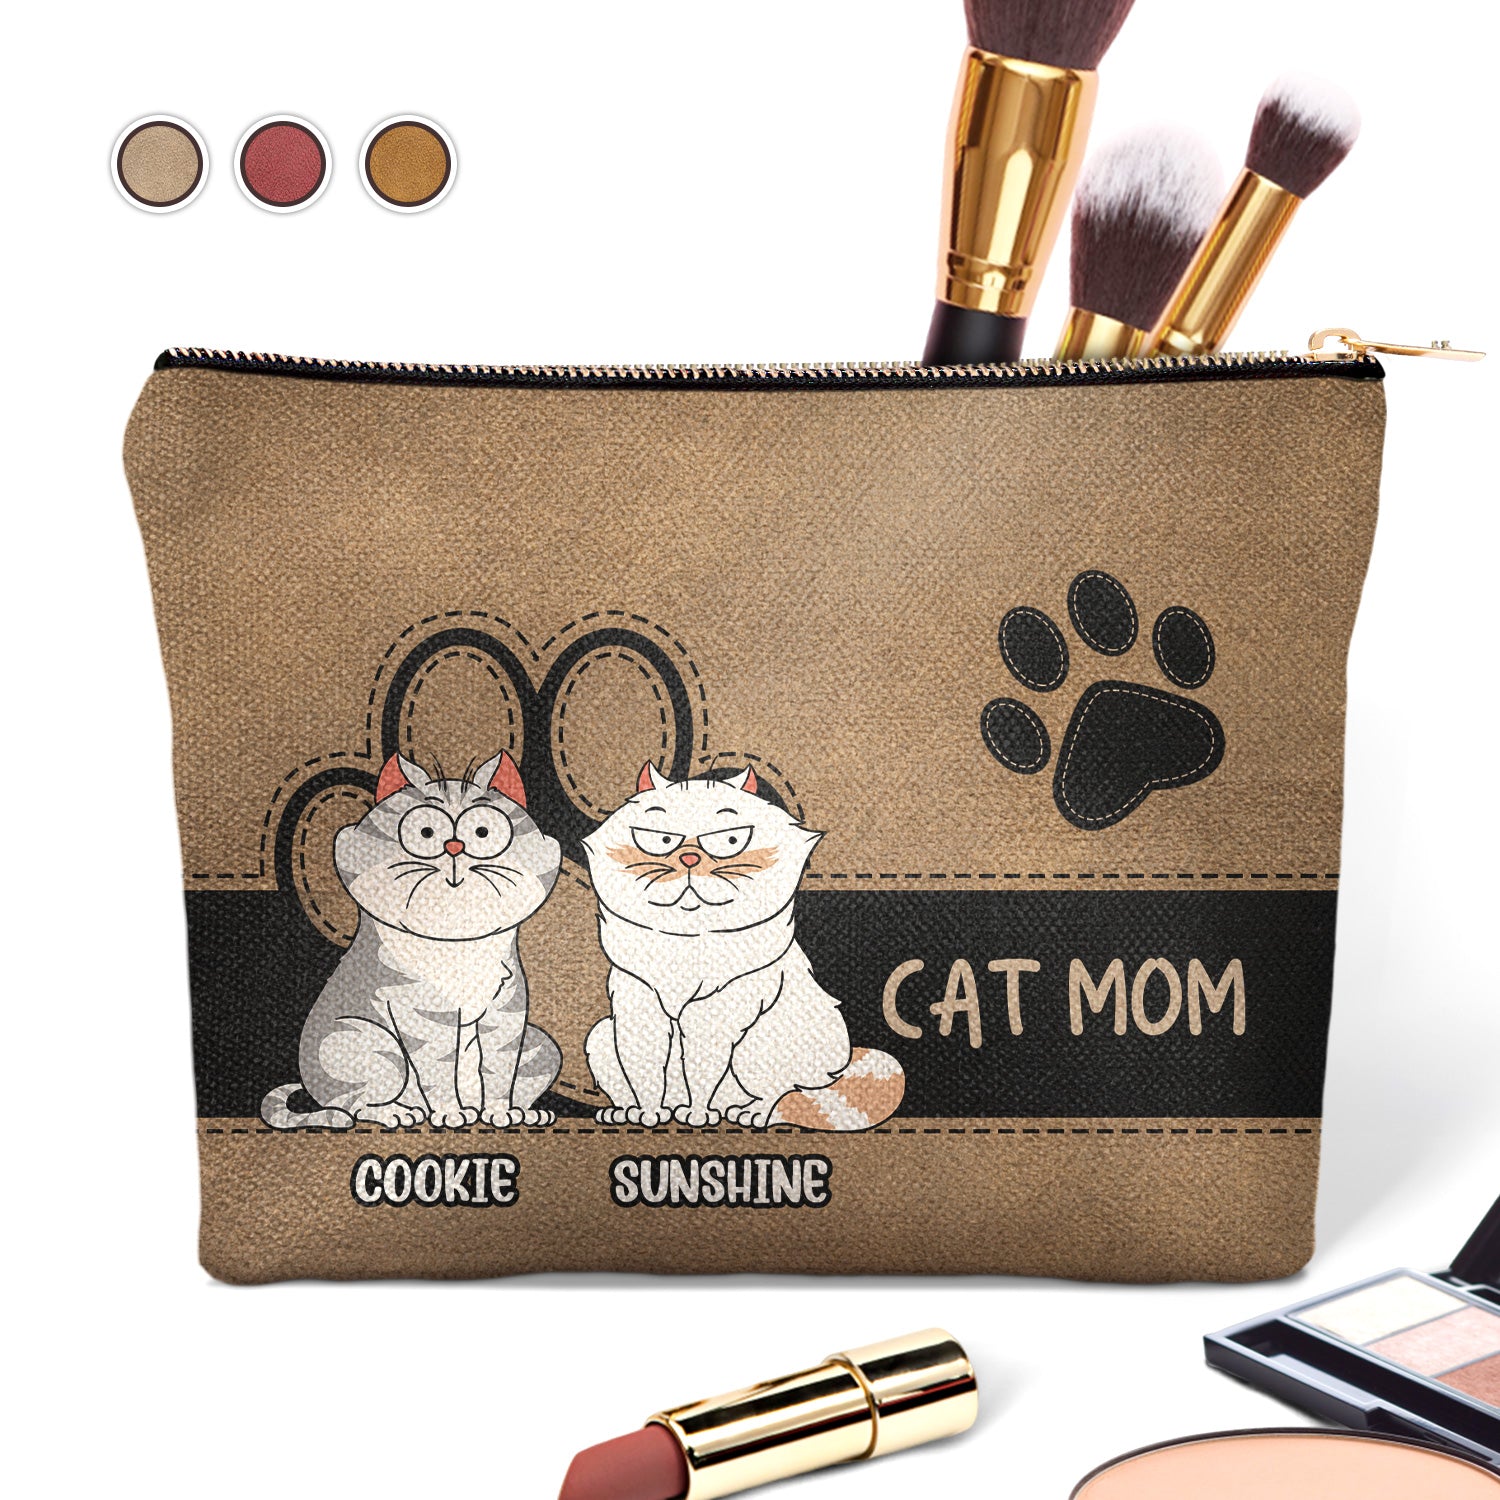 Cat Mom Funny Cartoon Style - Gift For Cat Lovers, Cat Mum - Personalized Cosmetic Bag